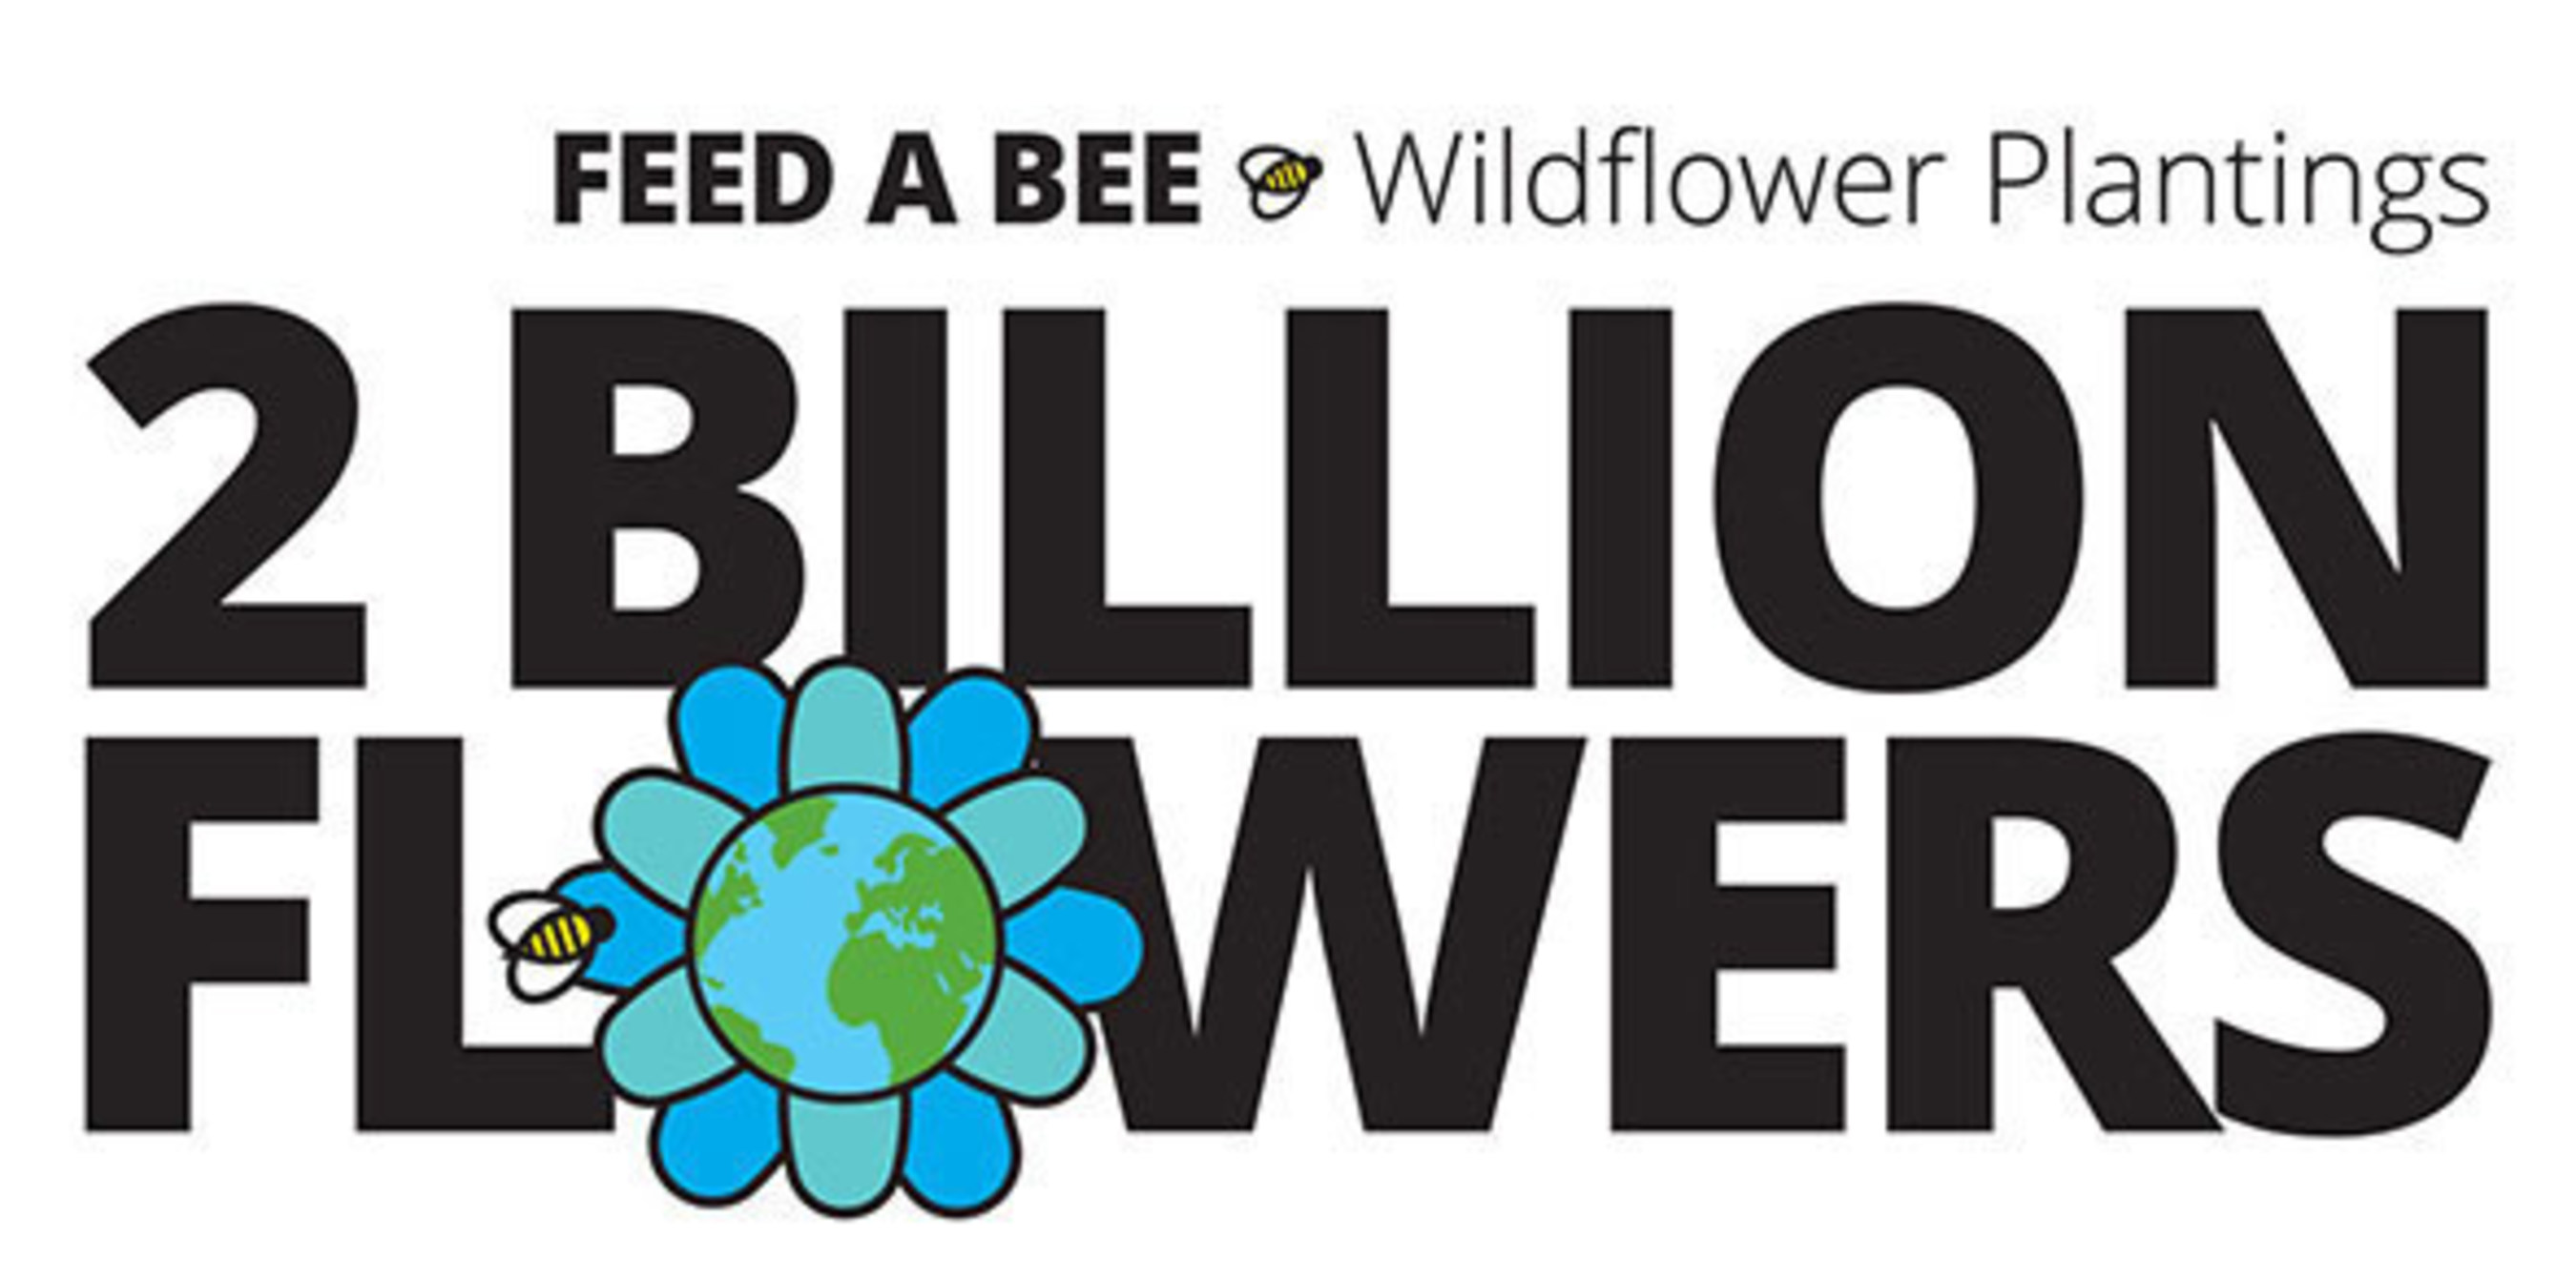 Over the last two years, nearly 1 million people and 117 organizations have joined Feed a Bee to provide more forage for pollinators around the country by planting over 2 billion wildflowers.